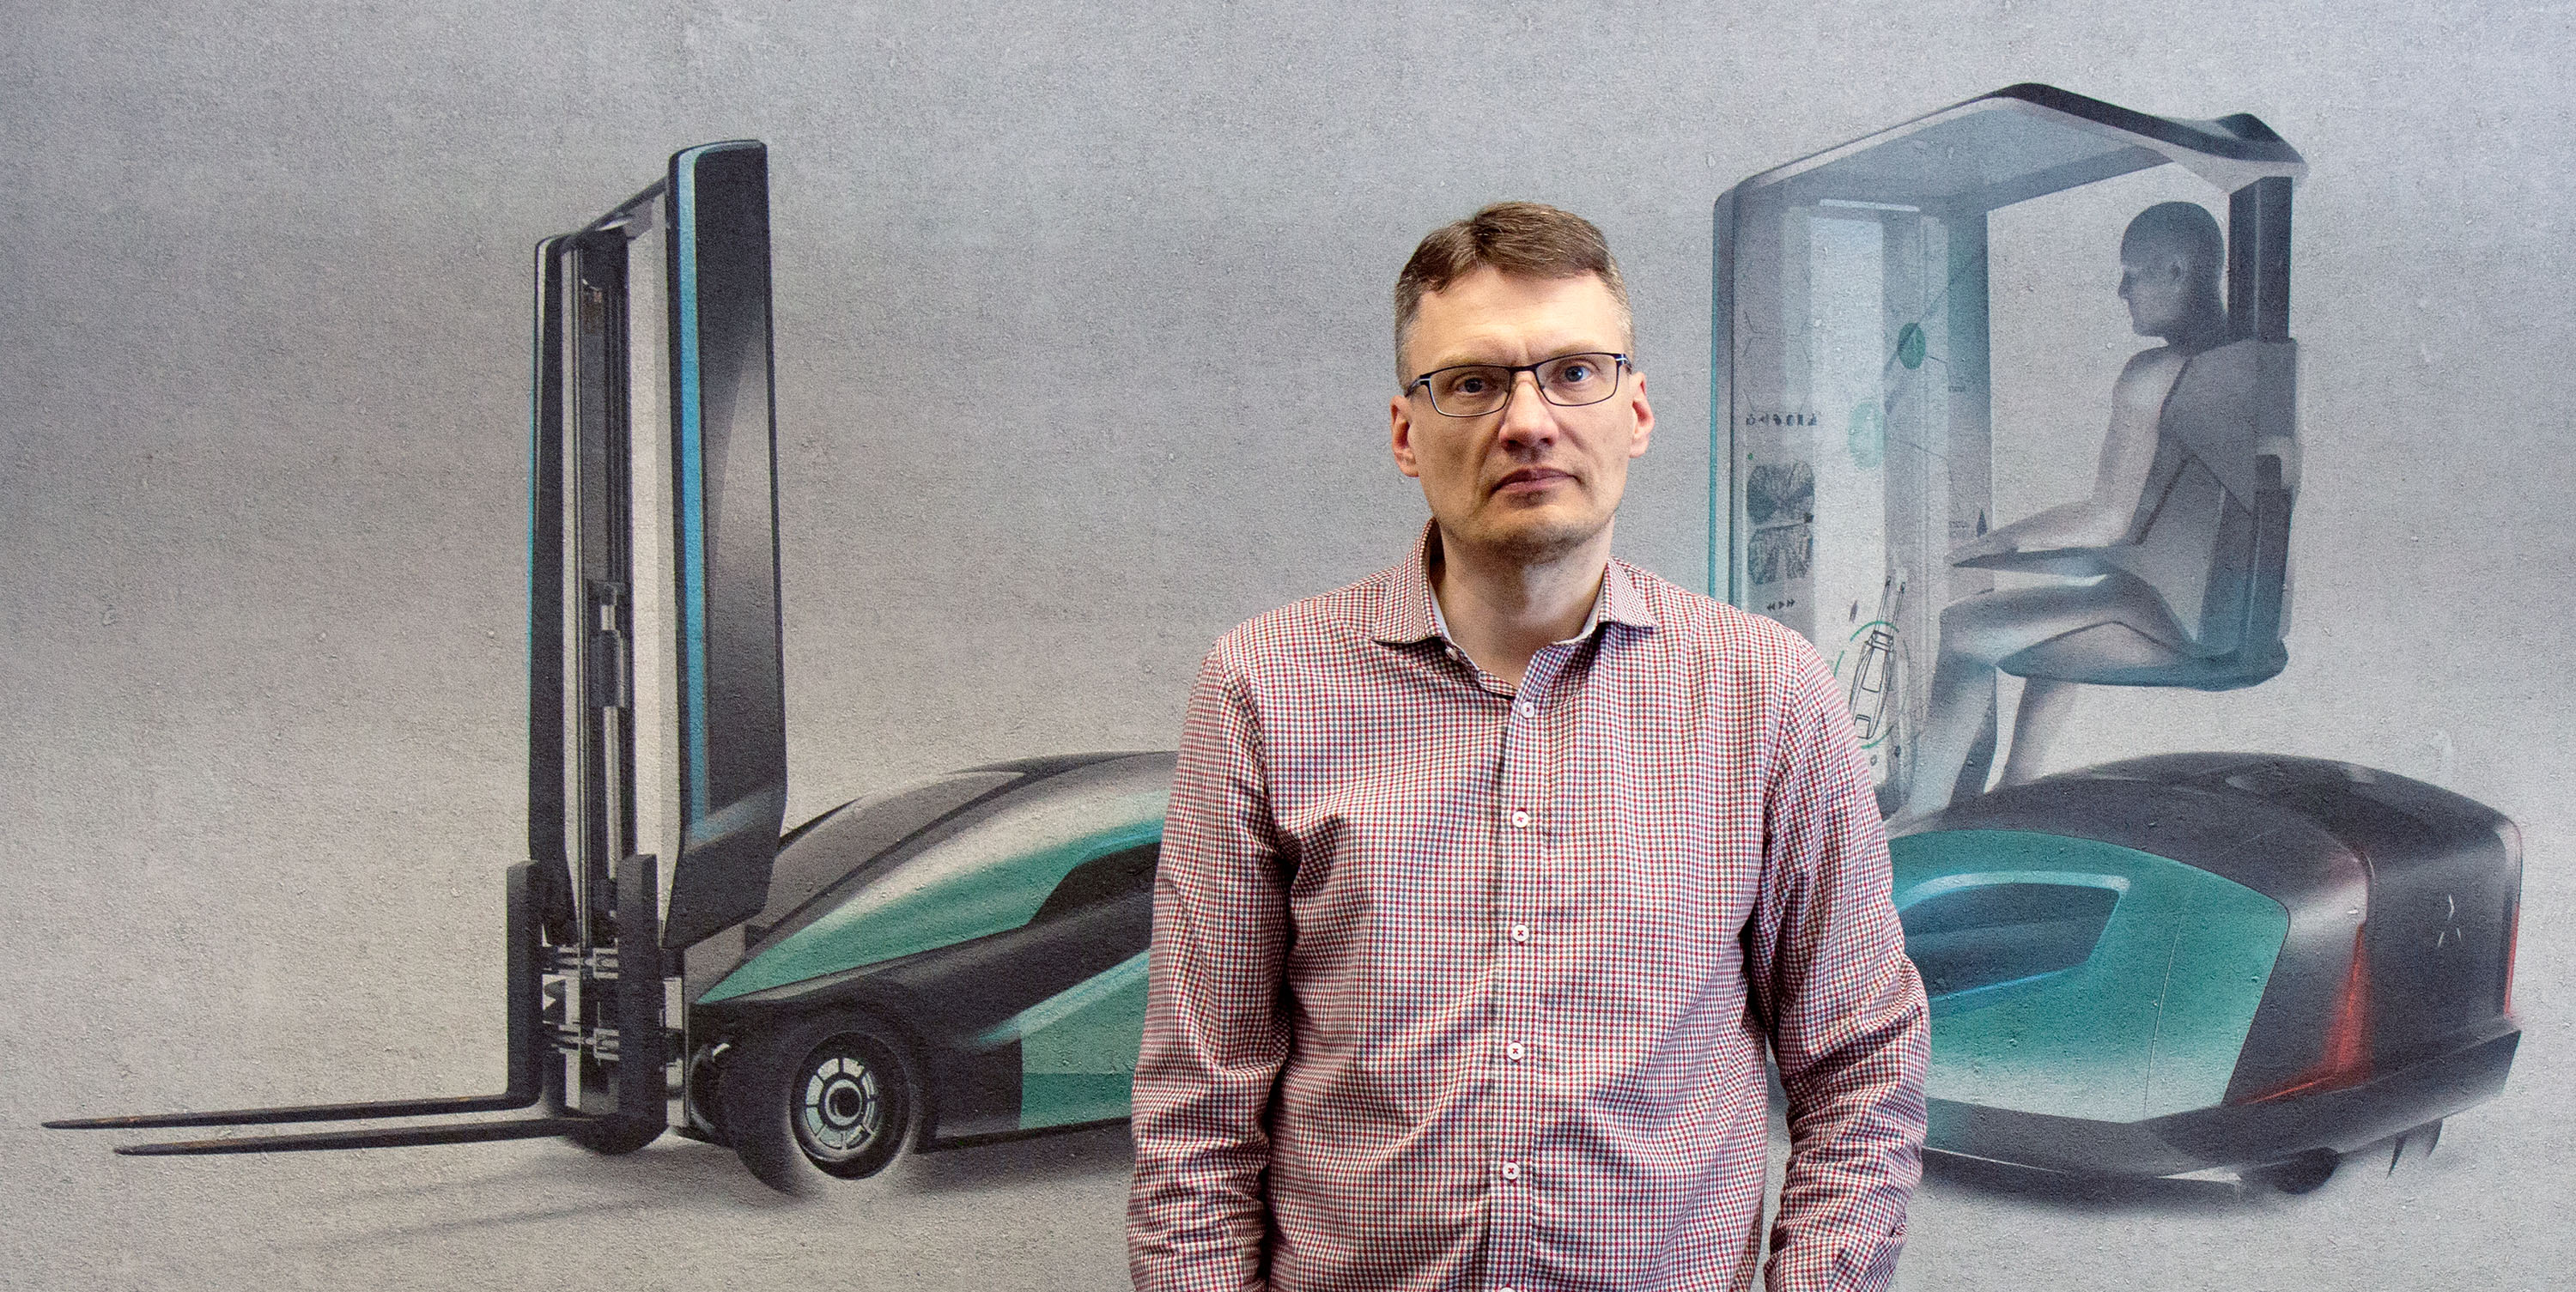 Jani Åström in front of an image of a forklift